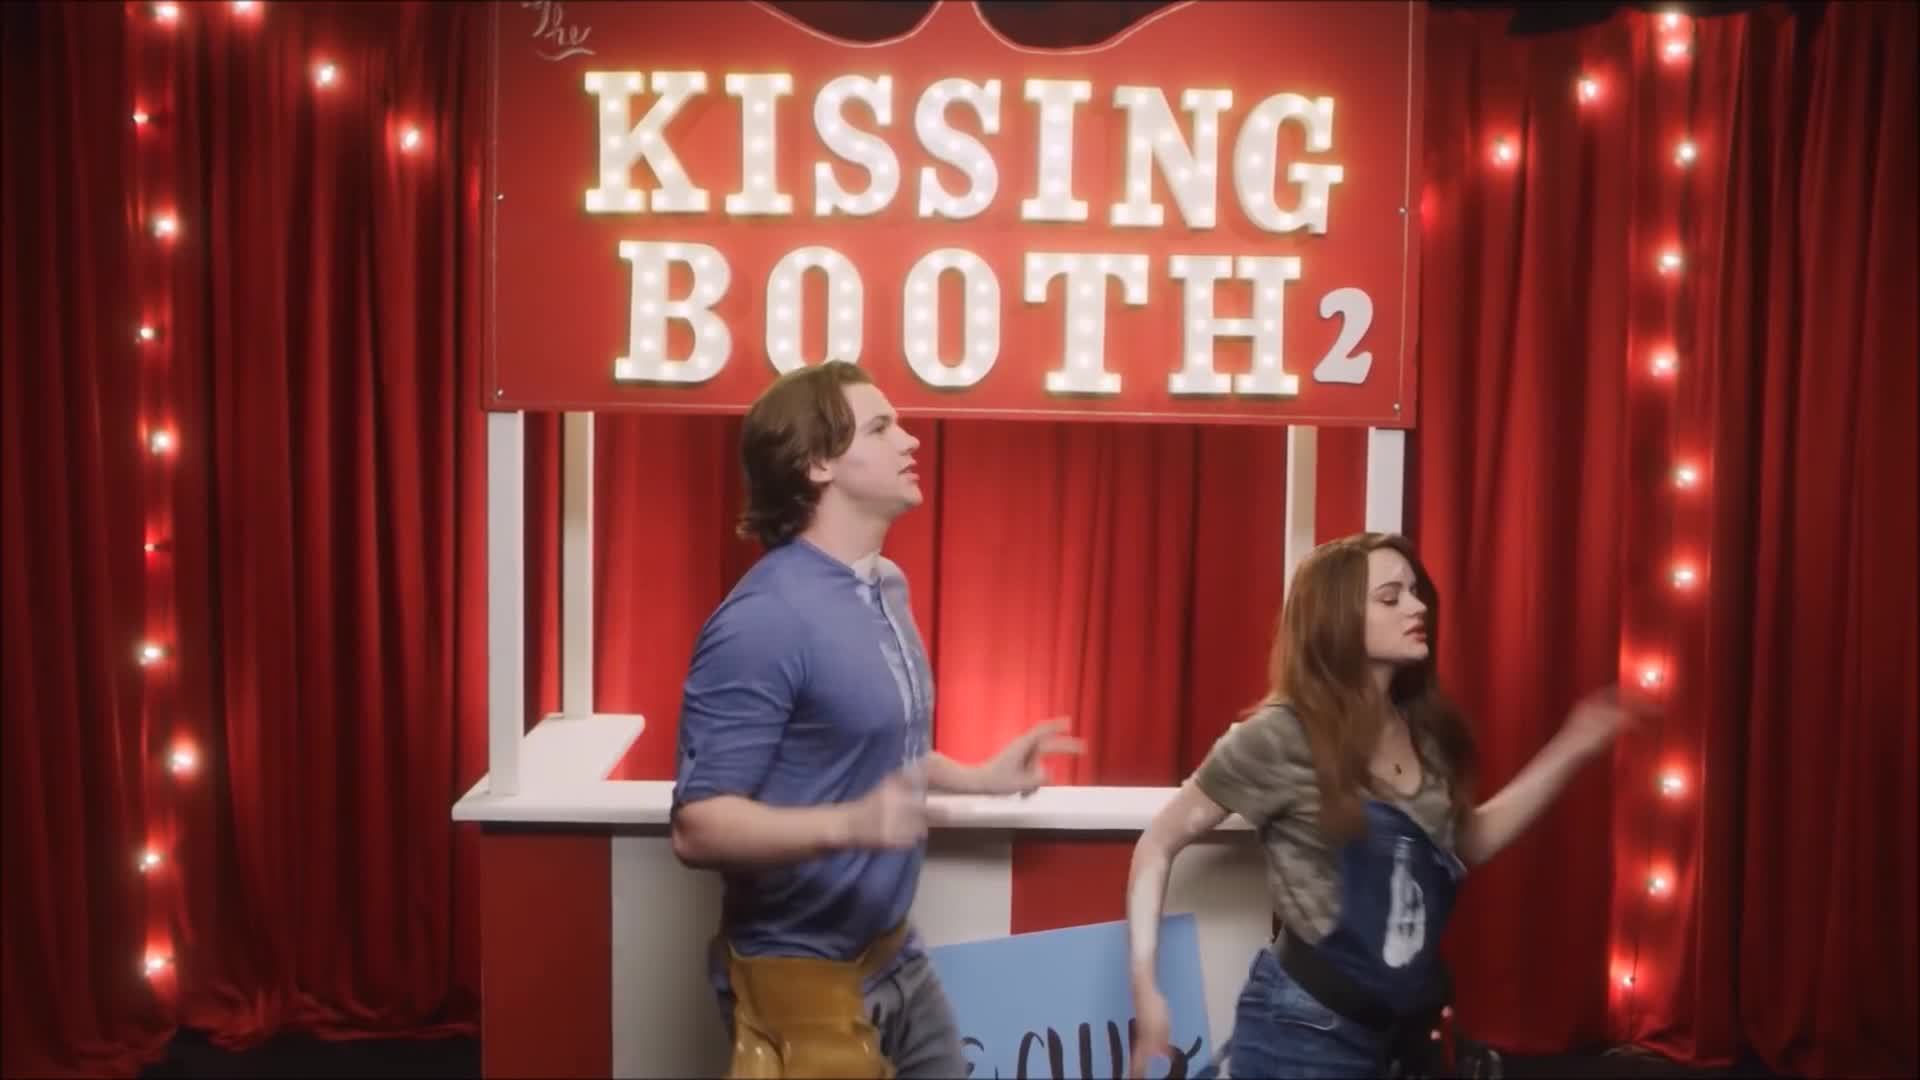 The Kissing Booth 2, Release Date, Cast, Plot And Much More